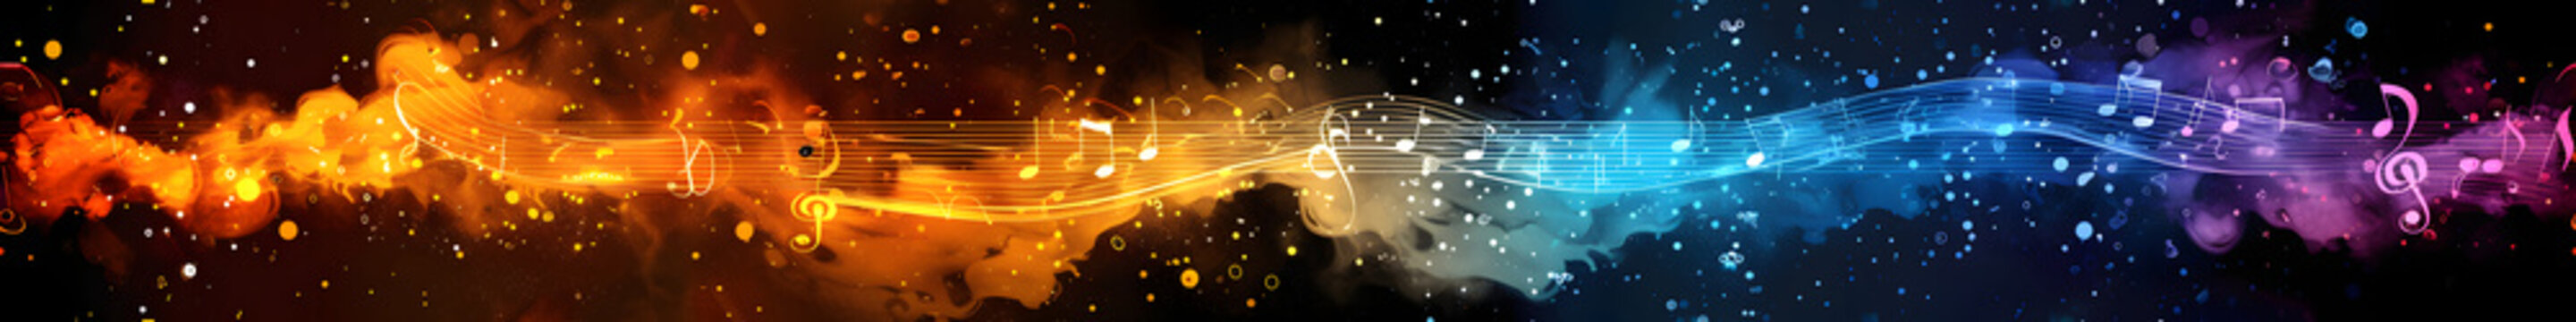 panorama of colorful spectrum musical notes with watercolor smoke in vibrant colors on a black background, for web banner with image ratio 8:1